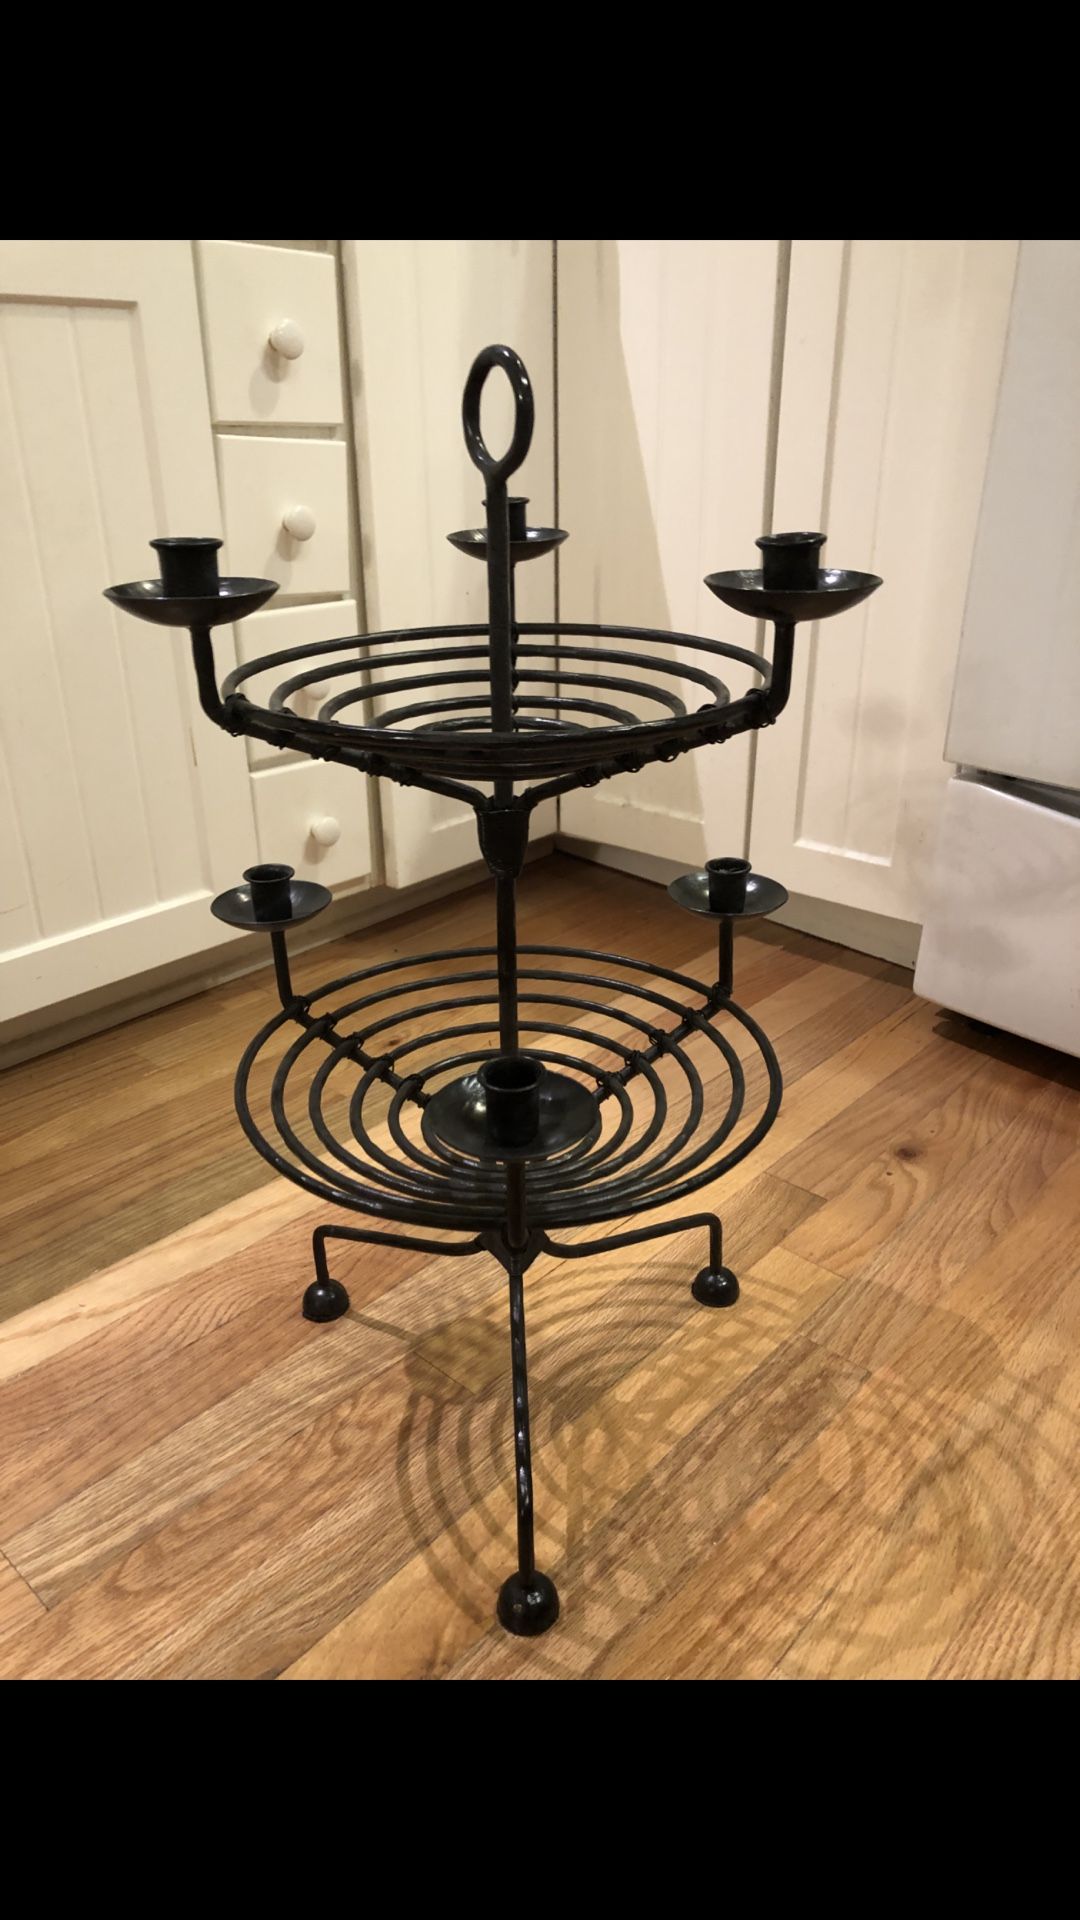 Two Tiered Black All Wrought Iron Tabletop Stand With Two “Baskets” And 6 Candle Holders .  